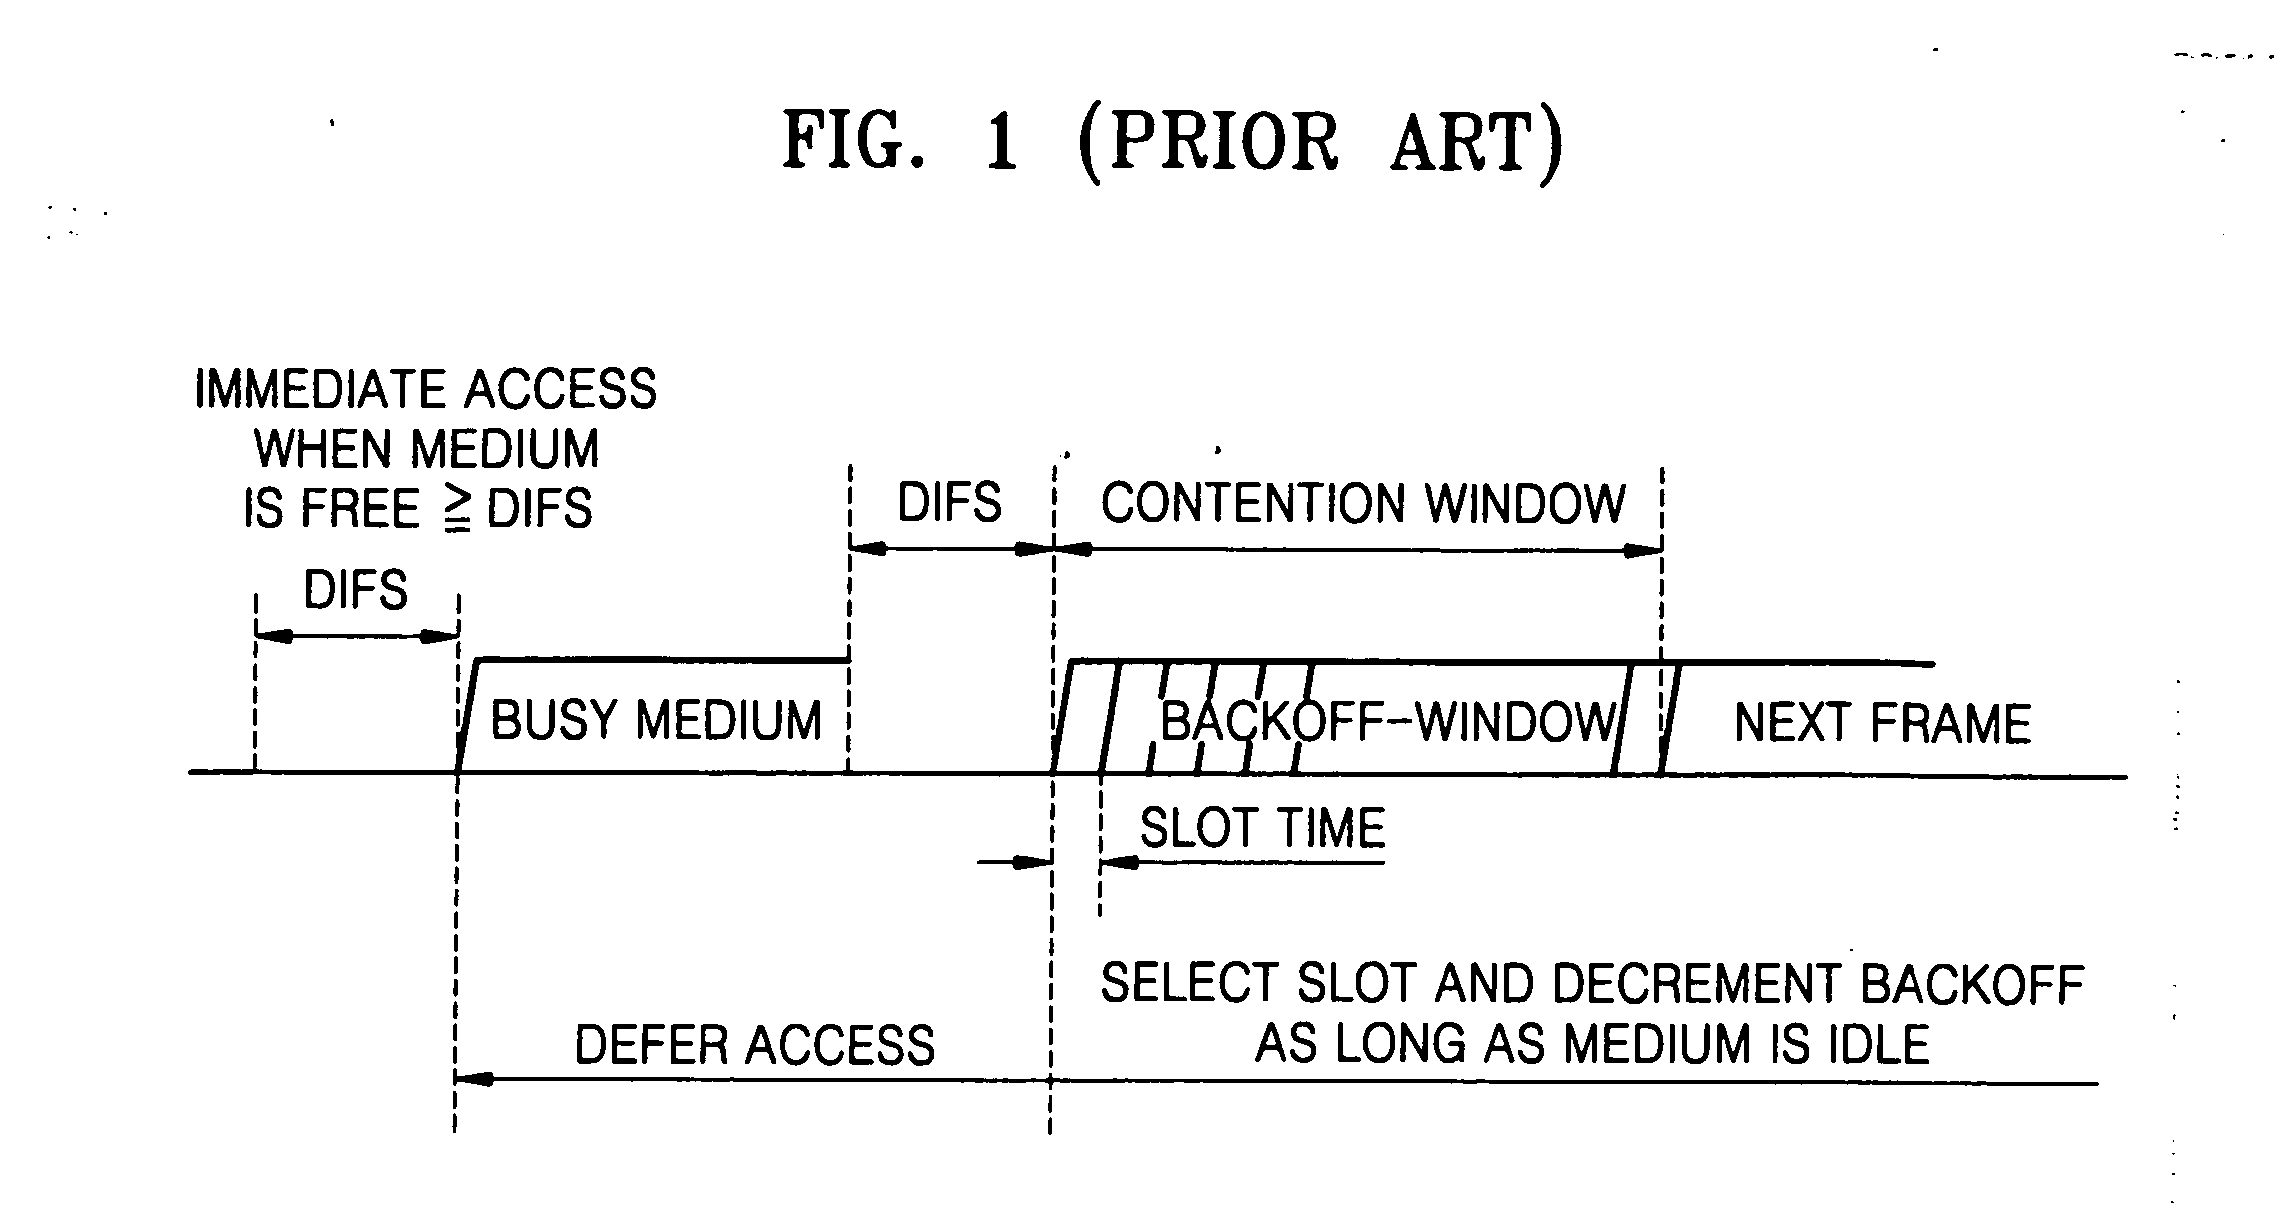 Method and apparatus for measuring quality of wireless channels